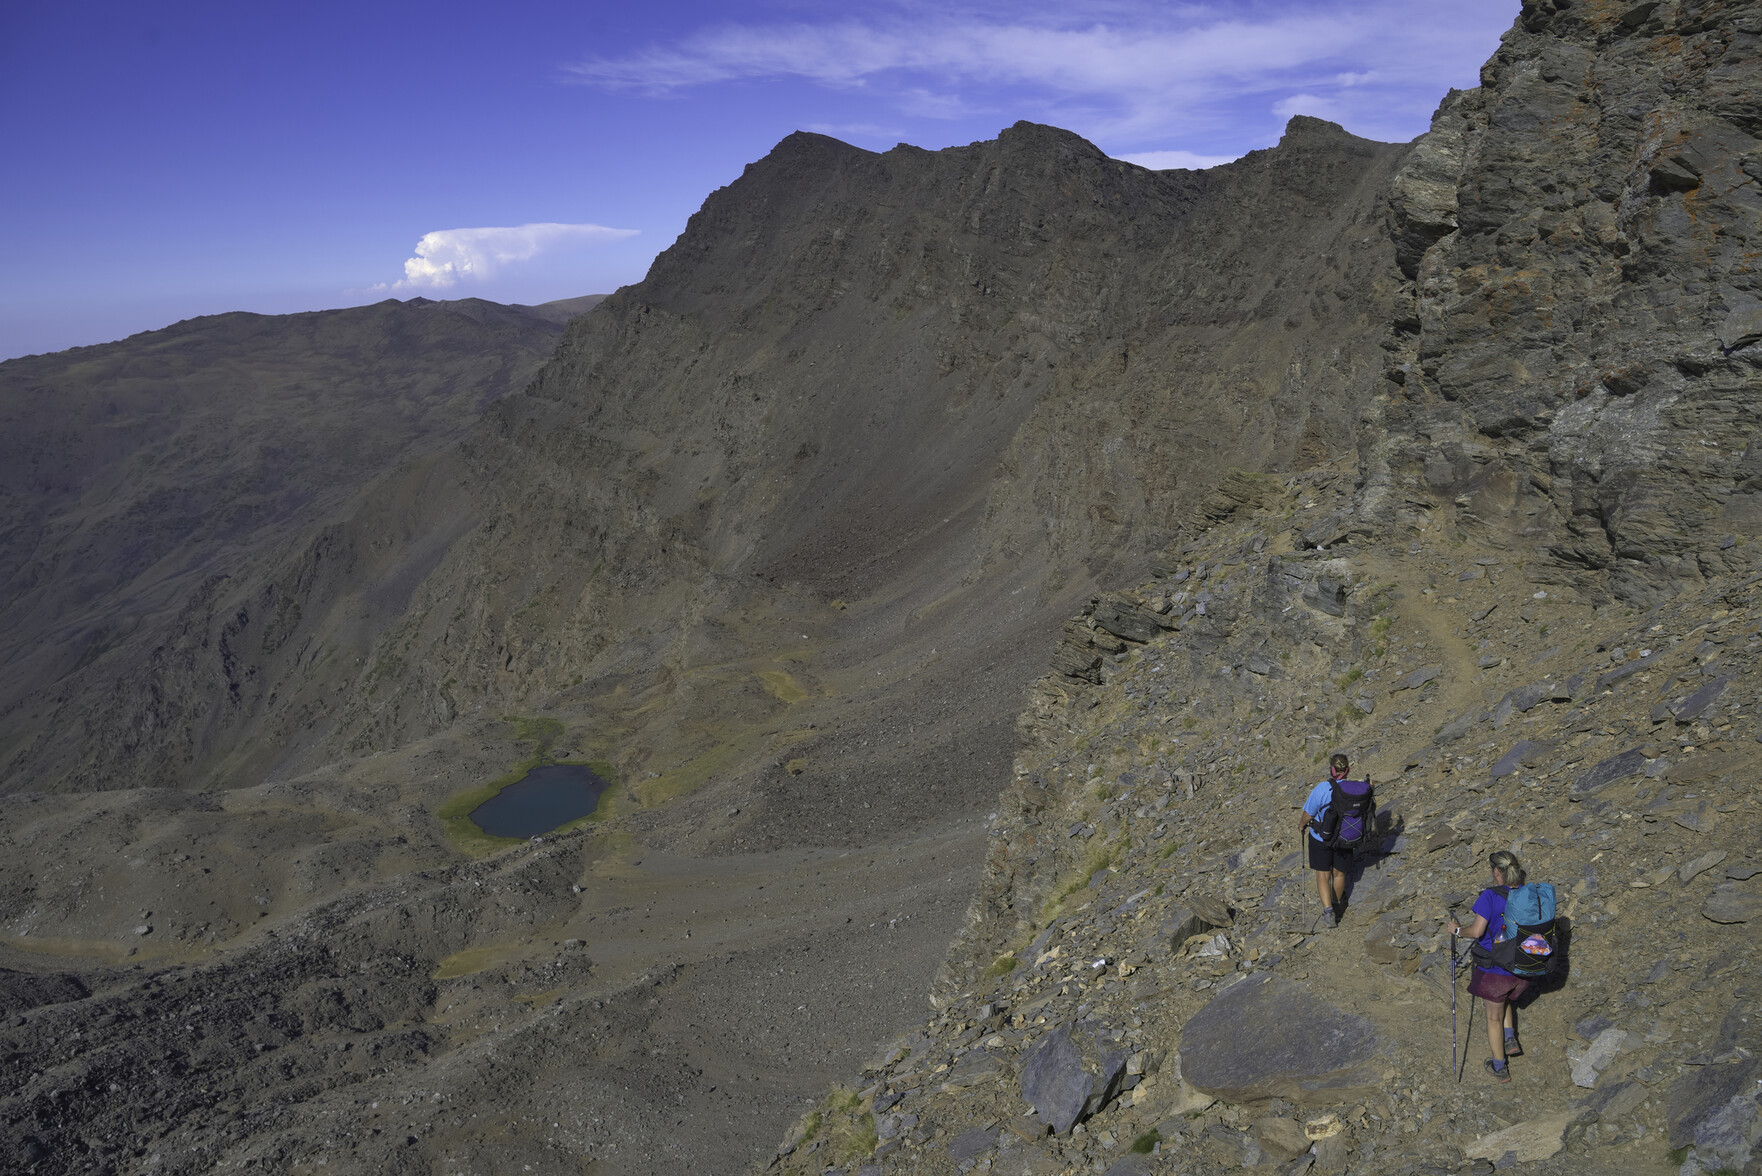 Some hikers walk along a narrow ledge across a mountain face. There is a blue lake far below